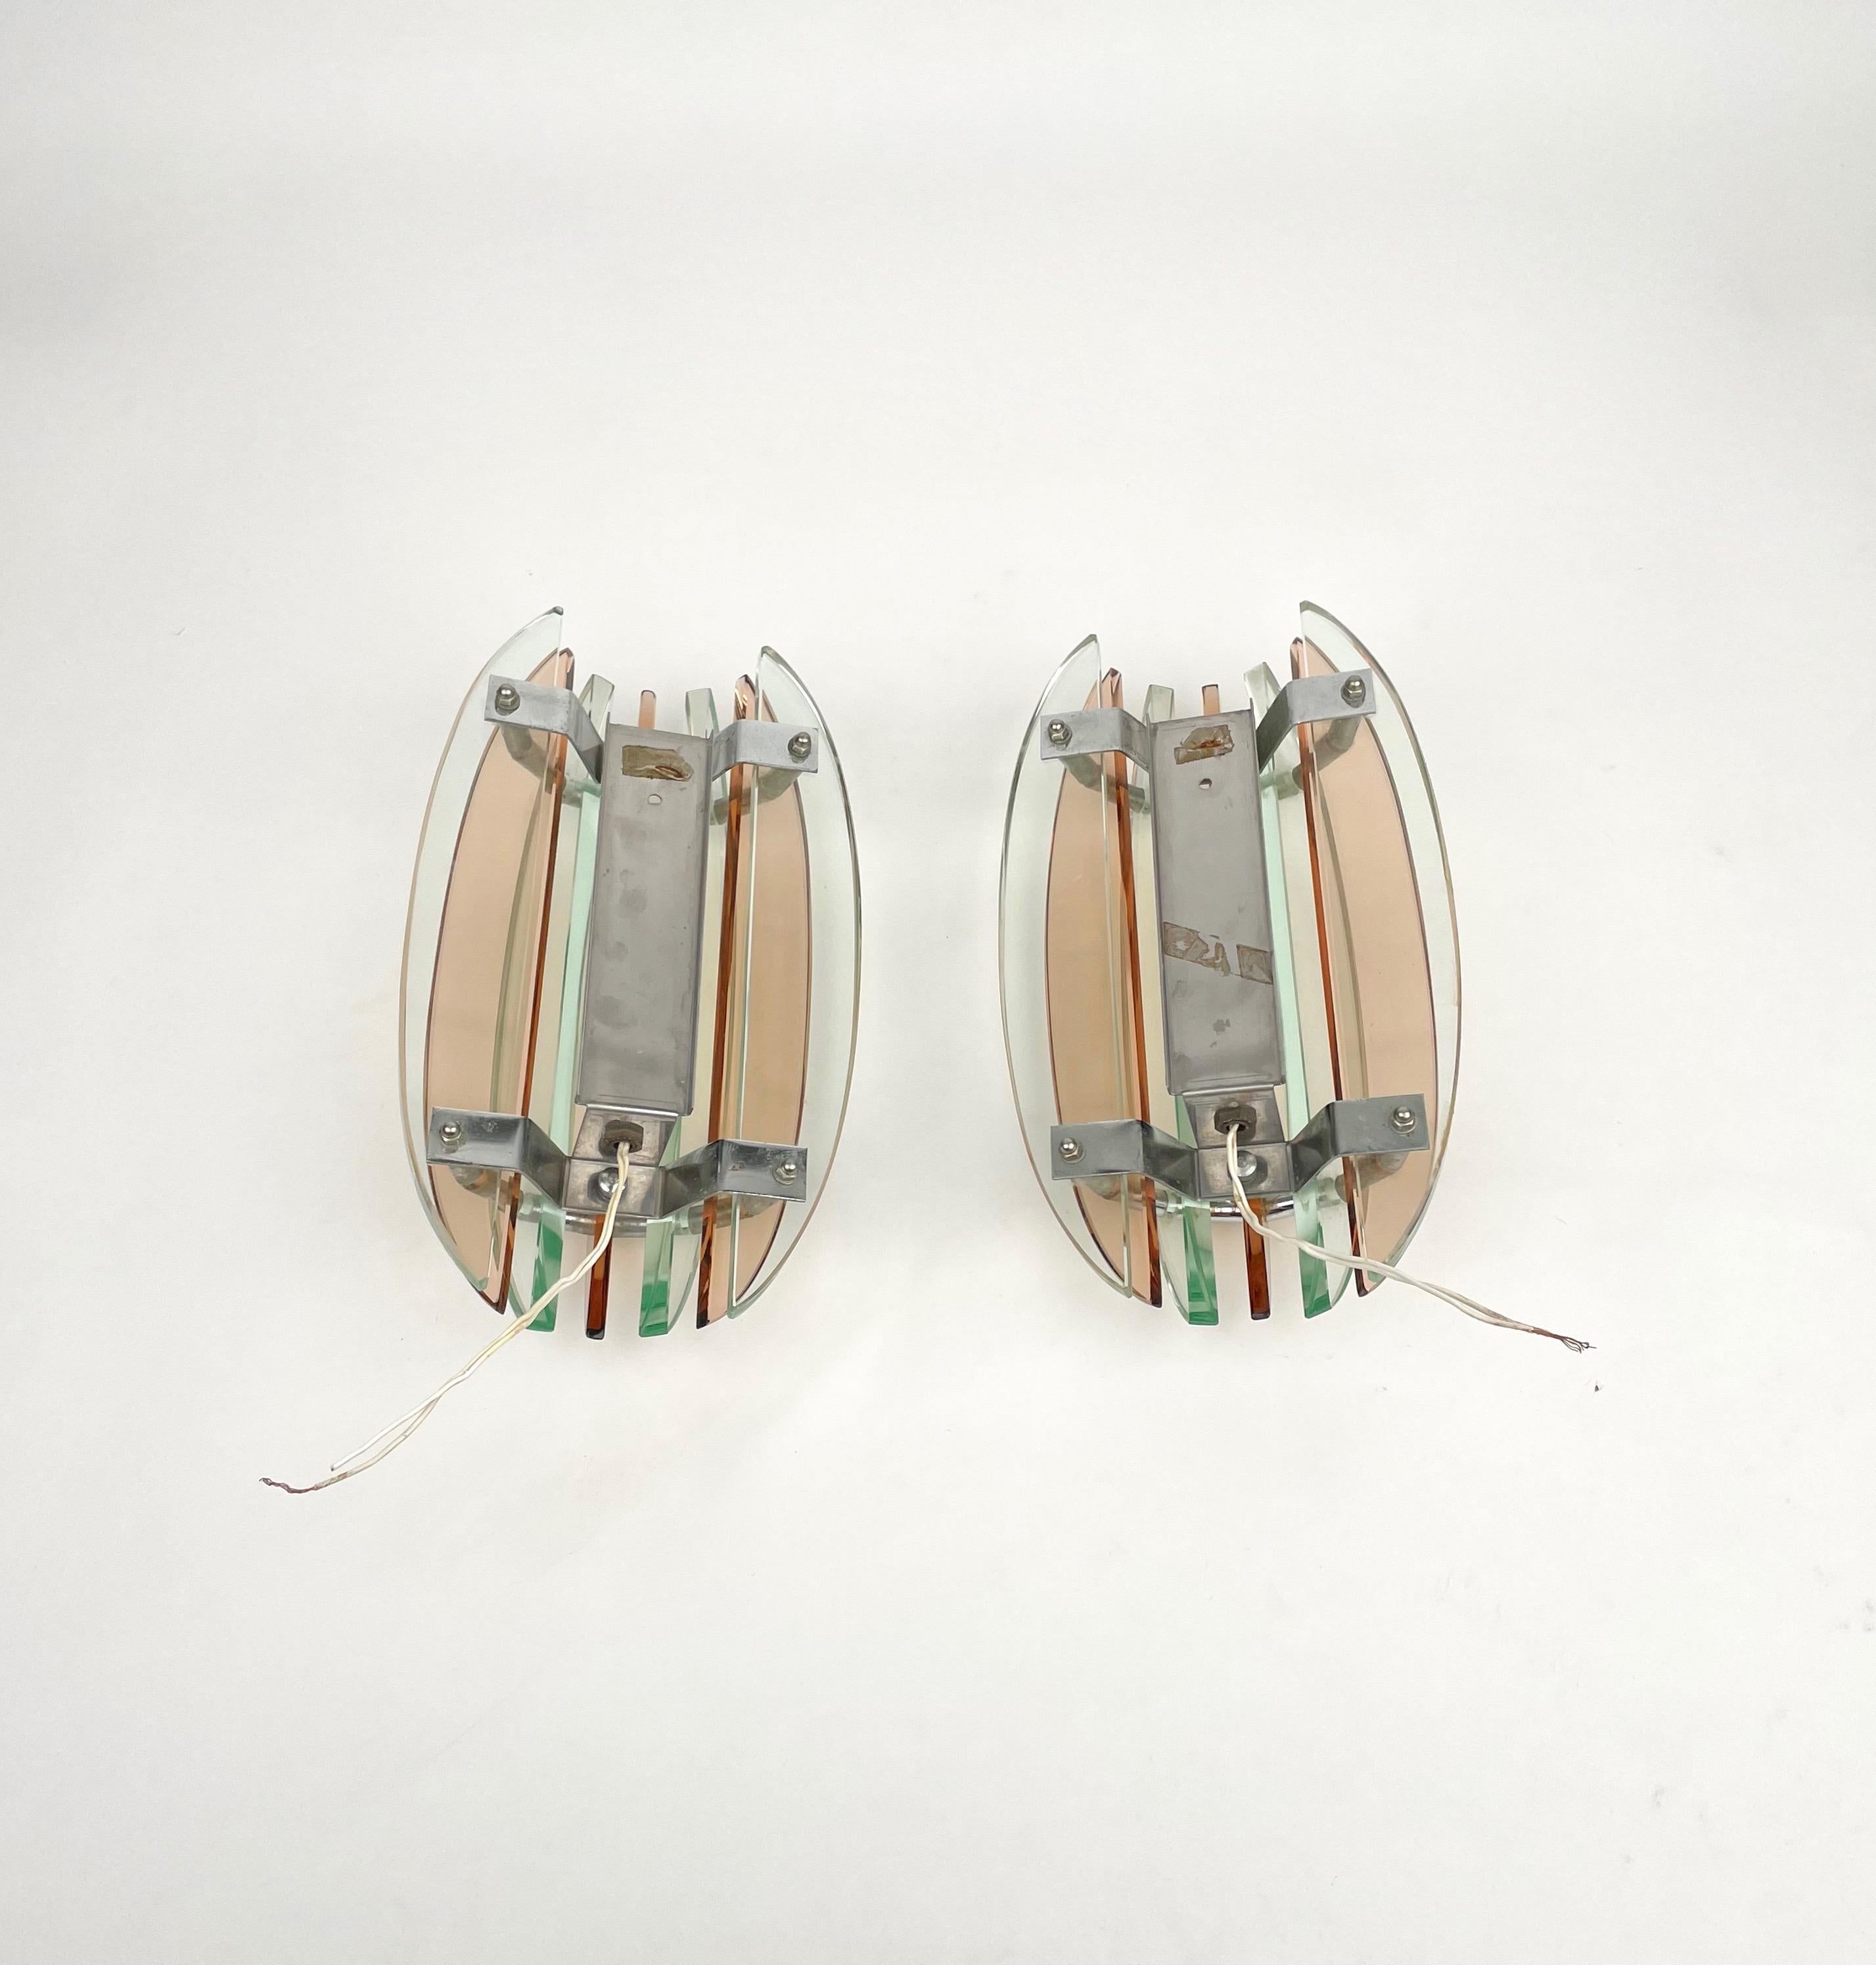 Pair of Wall Sconces in Colored Glass and Chrome by Veca, Italy, 1970s For Sale 1